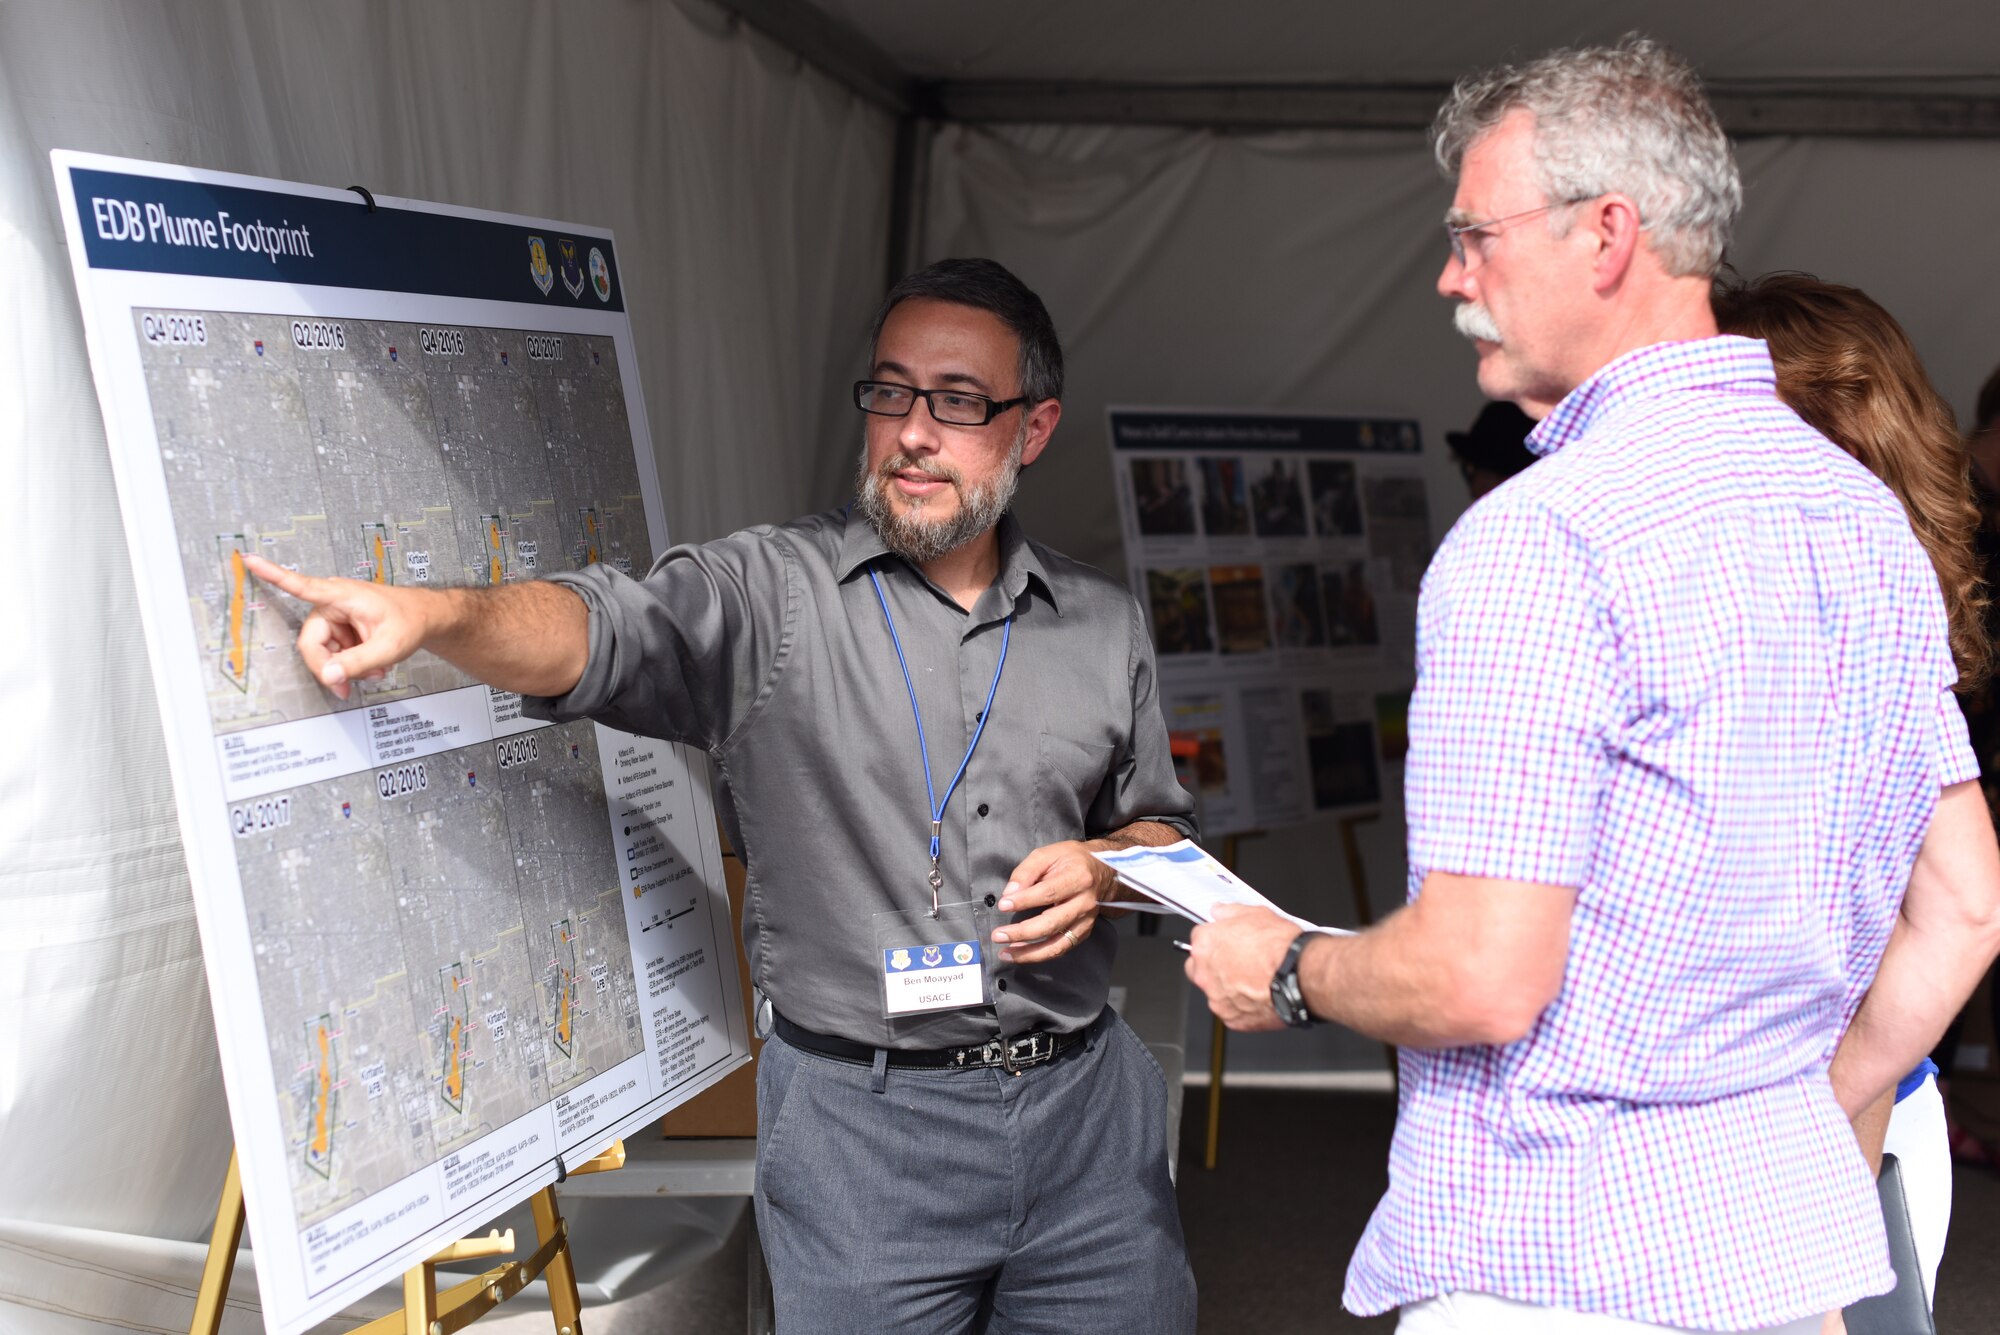 Ben Moayyad, U.S. Army Corps of Engineers project manager, explains the results of the bulk fuels contamination leak cleanup project to attendees of an open house at Kirtland Air Force Base, N.M., July 25, 2019. The open house gave the public a chance to see the treatment facility, learn about and ask questions about the cleanup process. (U.S. Air Force photo by Senior Airman Eli Chevalier)